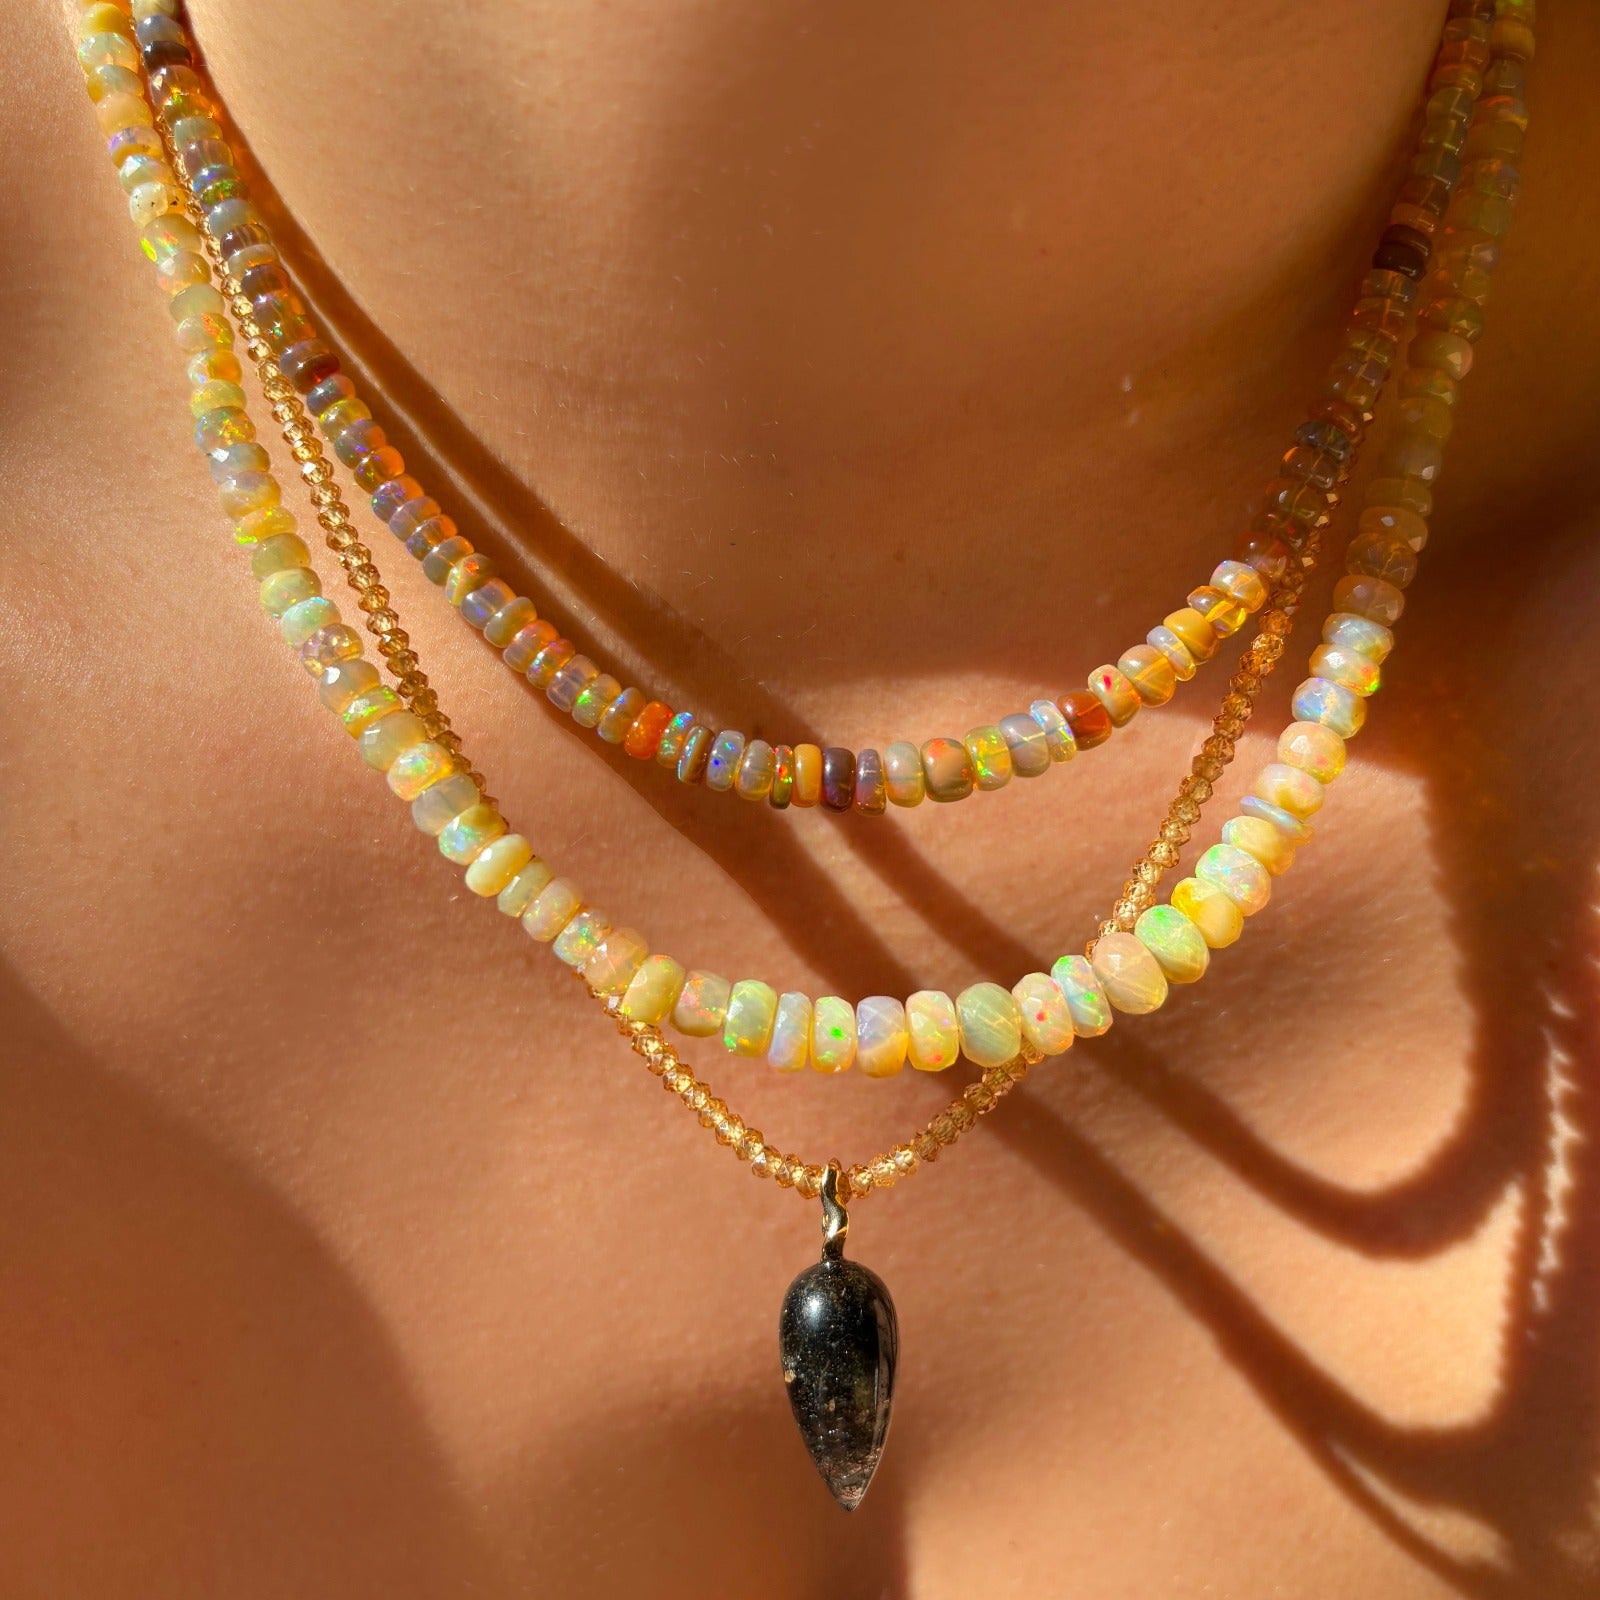 Shimmering beaded necklace made of faceted opals in shades of pastel yellow and clear opals on a gold linking ovals clasp. Styled on a neck layered with an acorn drop charm.